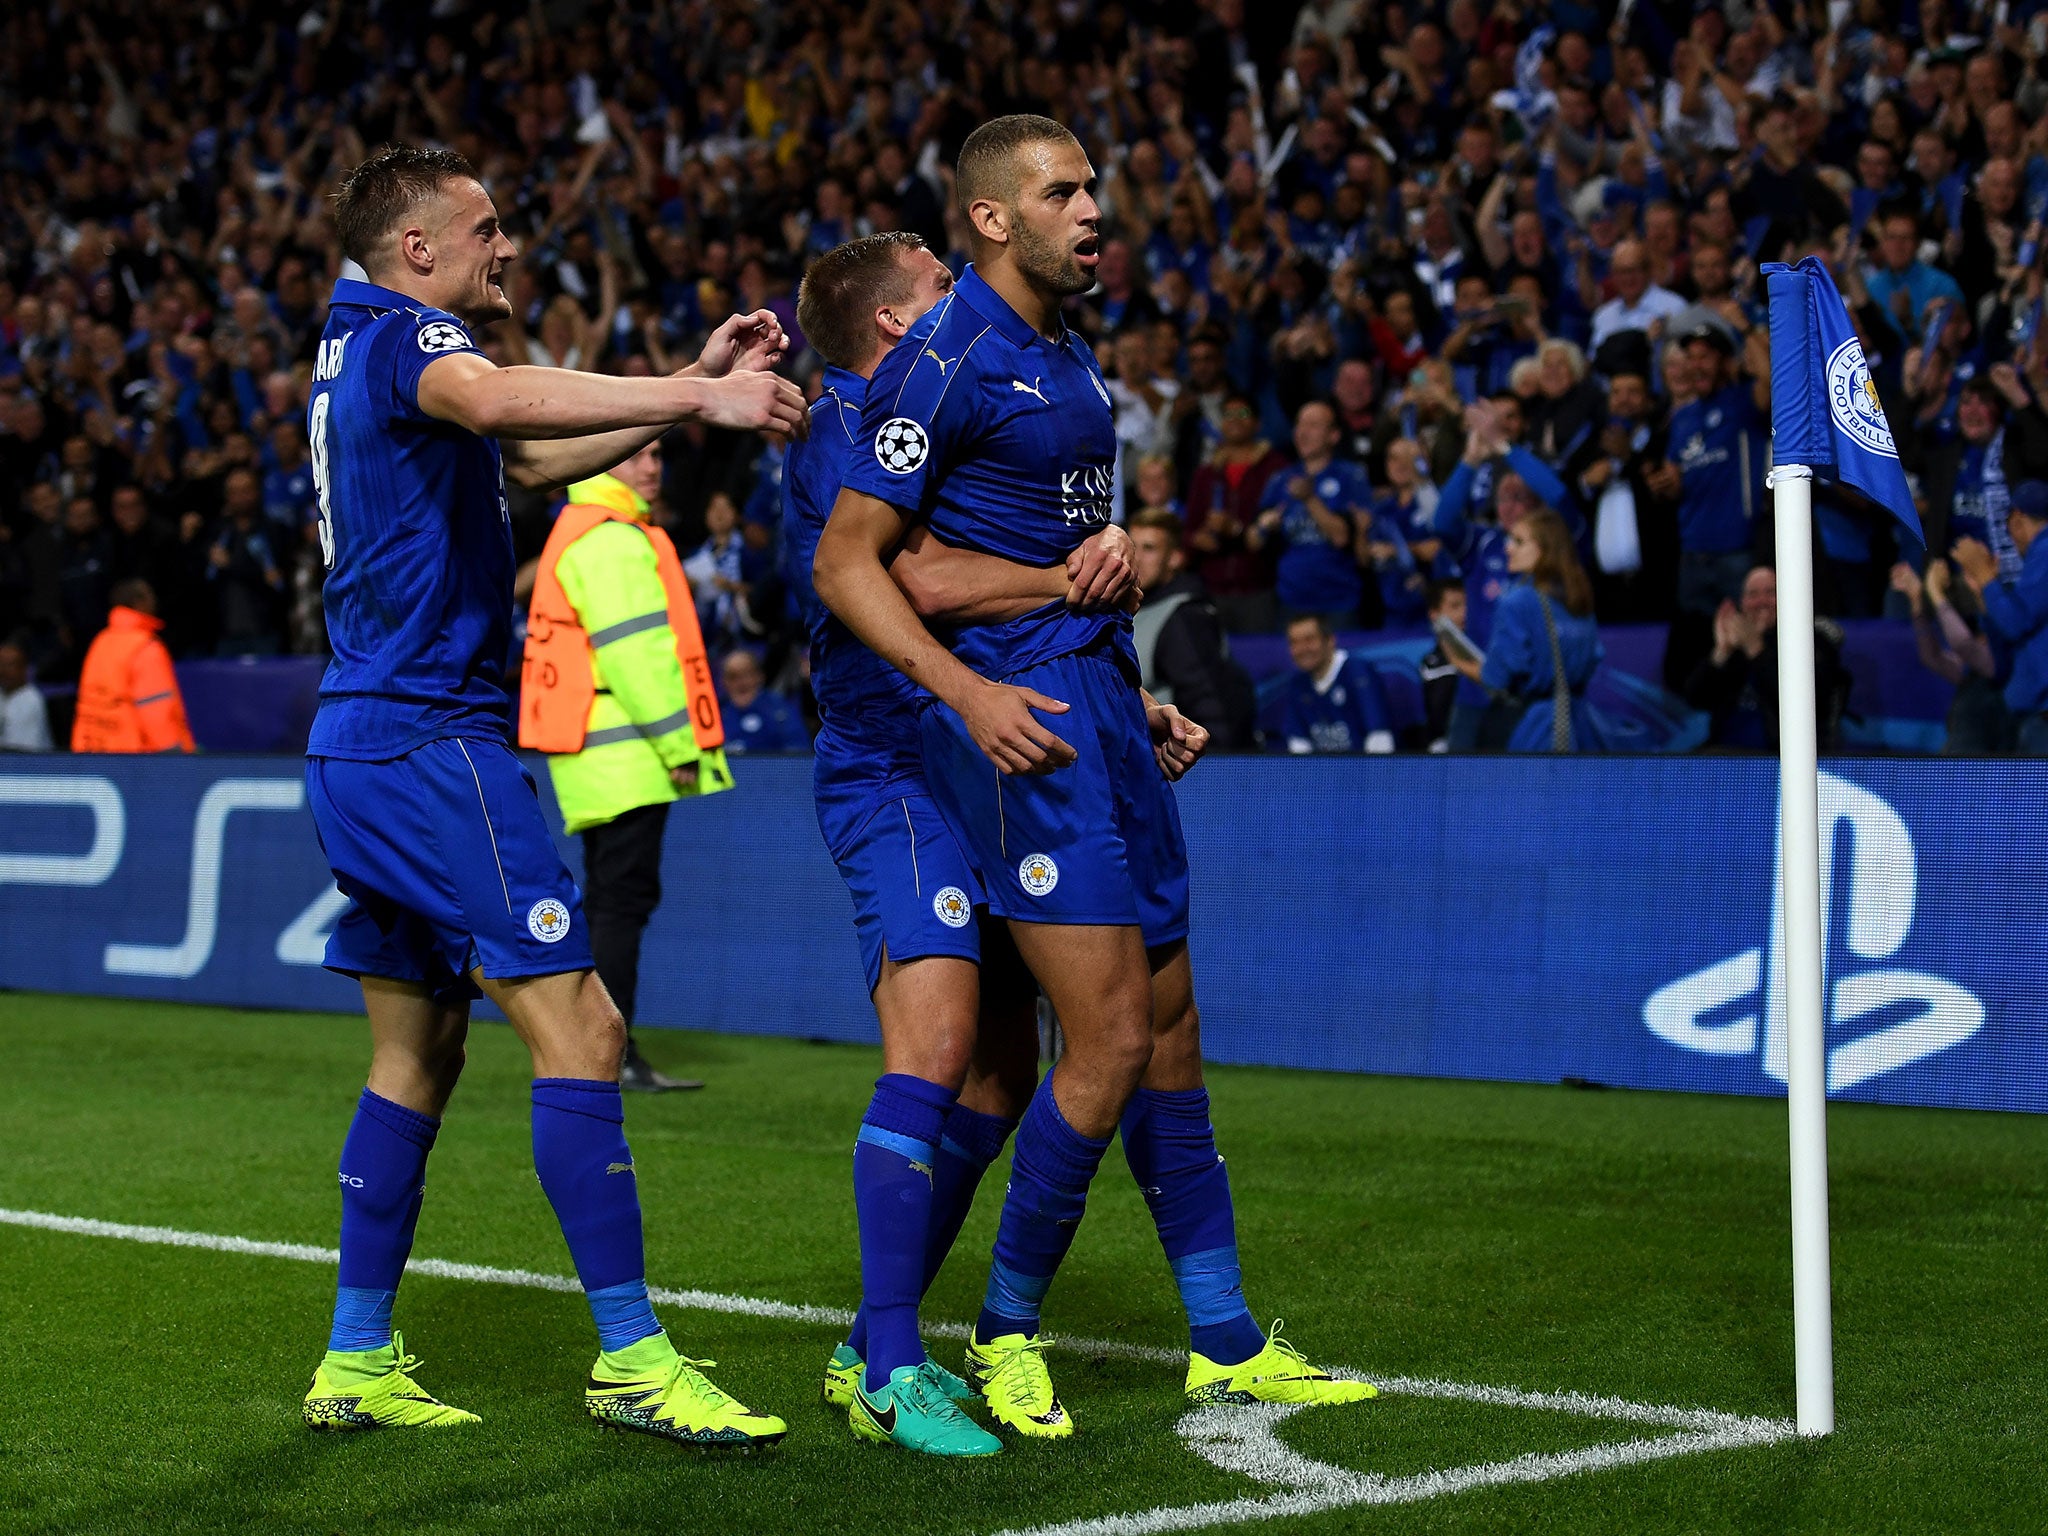 Leicester head into Wednesday night's Champions League tie against Sevilla on the back of a comfortable group stage campaign